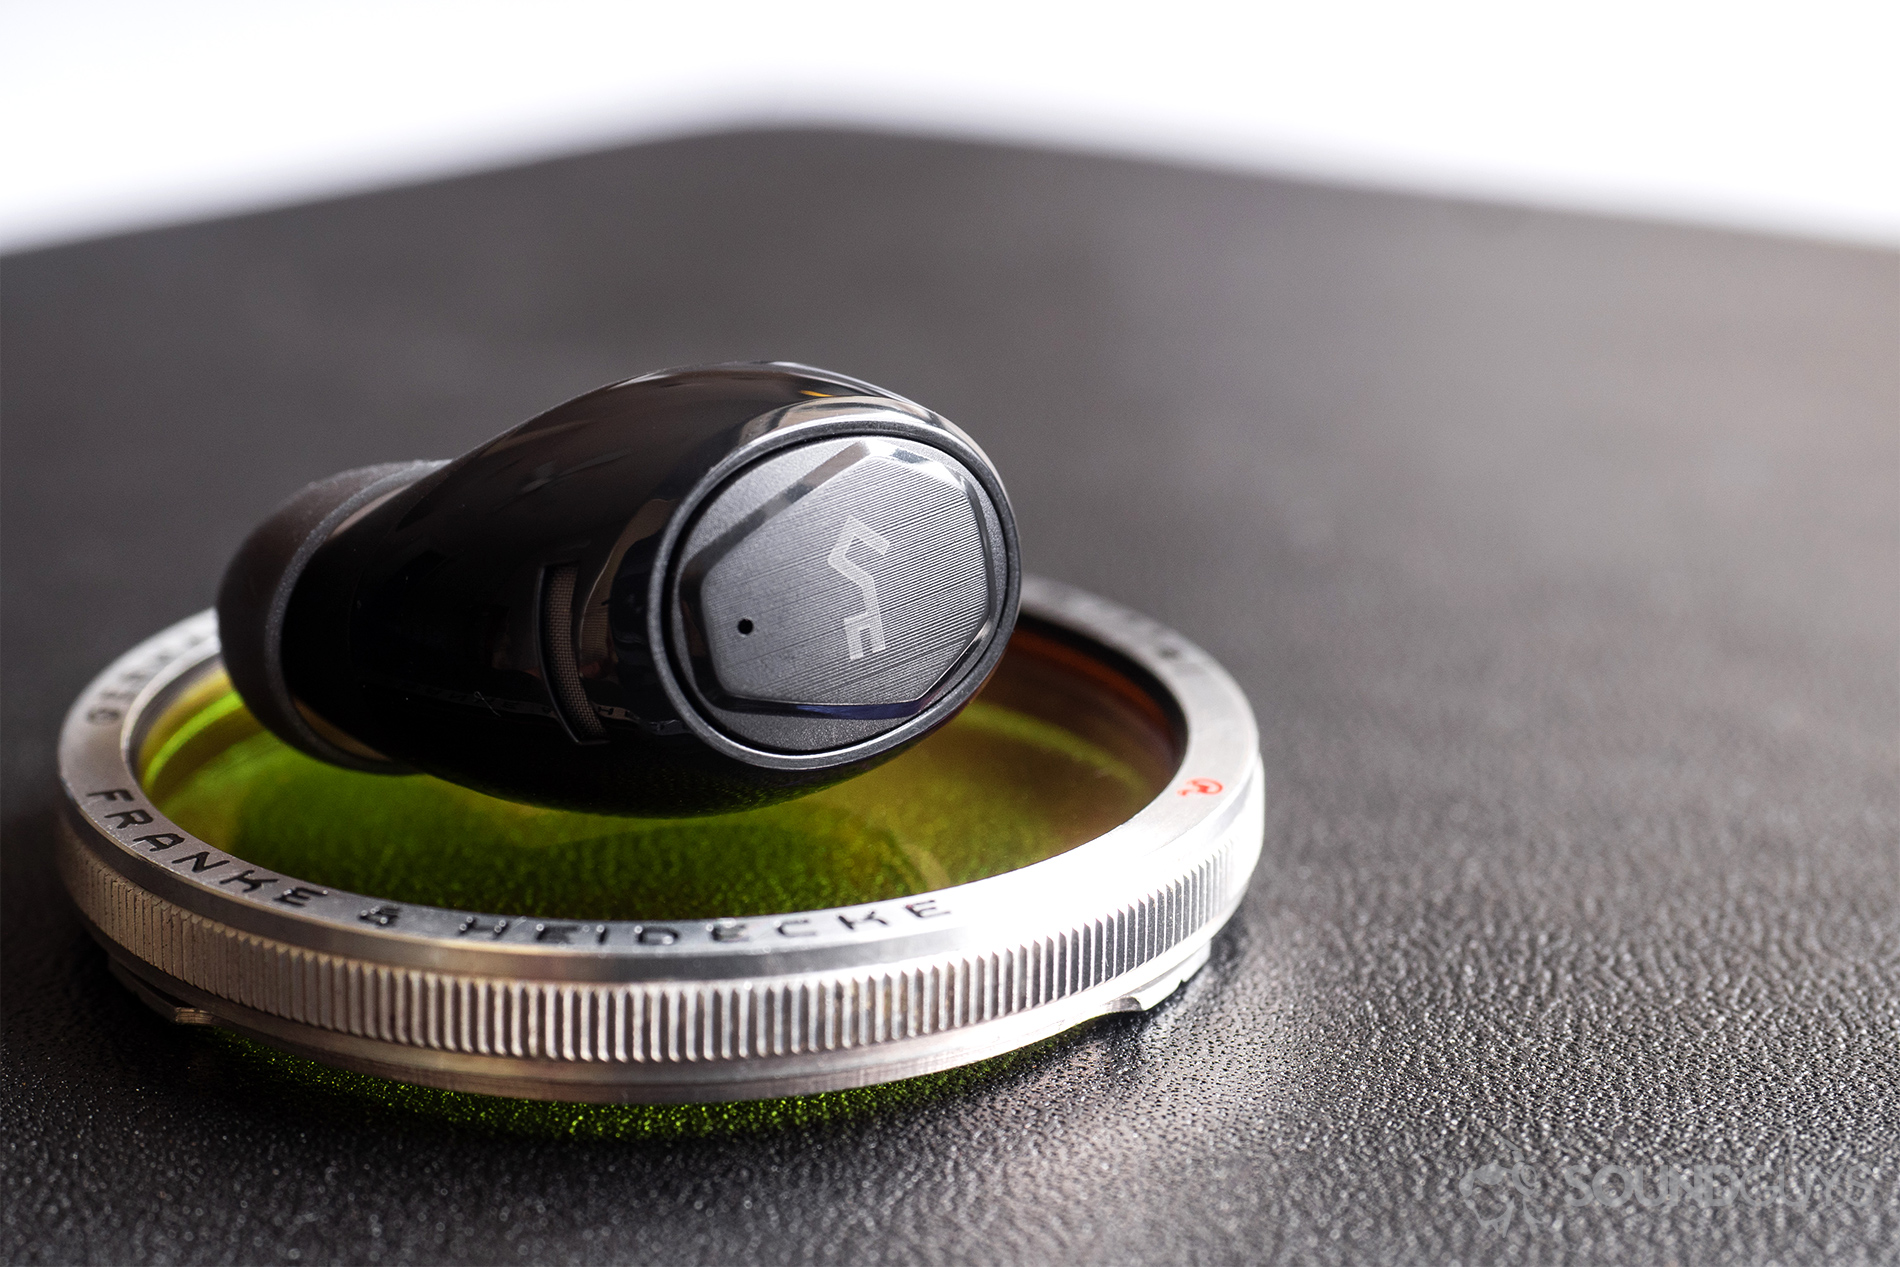 Aukey EP-T16 review: An earbud on a lens filter.